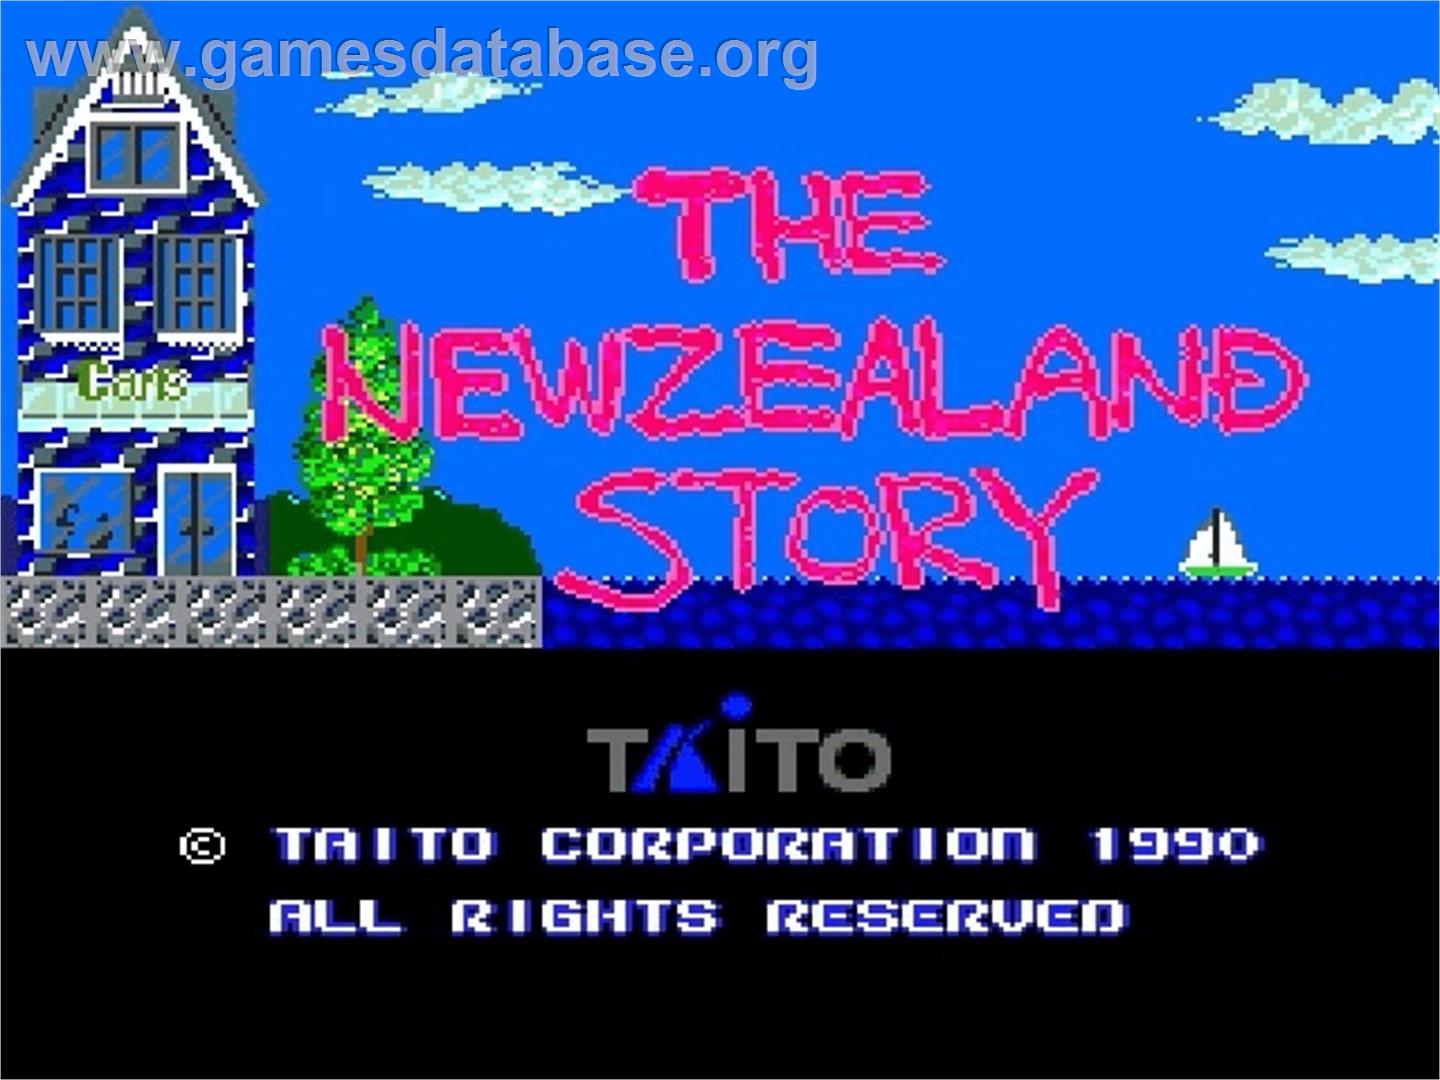 The New Zealand Story - NEC PC Engine - Artwork - Title Screen